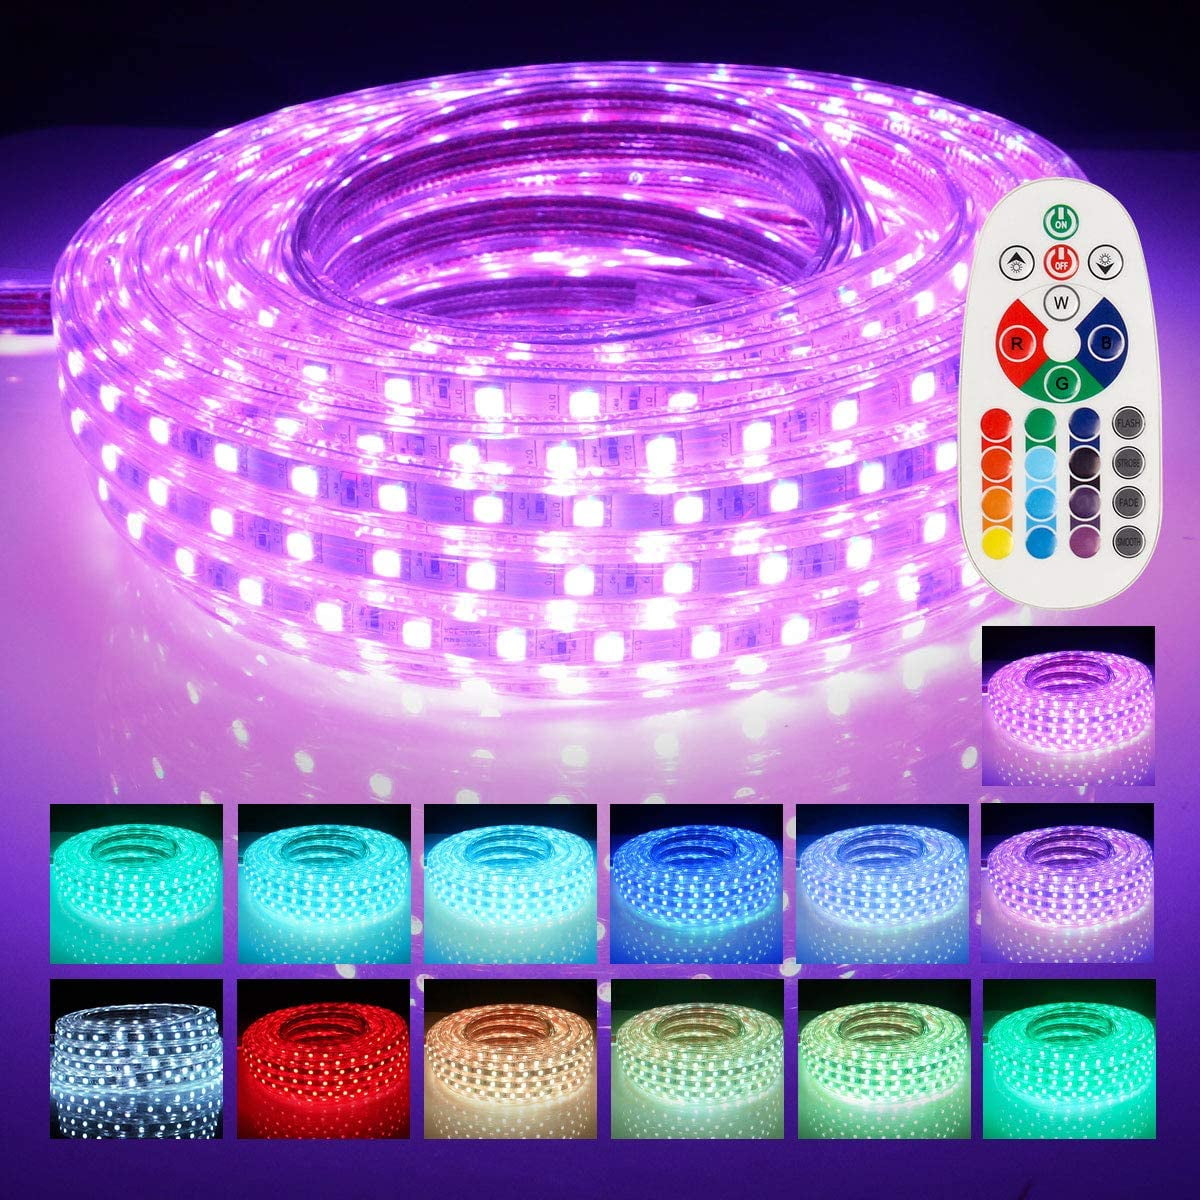 PHOPOLLO LED Strip Lights Ideal for House and Holiday Decoration No White 3528 300LEDs Waterproof Flexible LED Lights for Bedroom with 24 Key IR Remote Controller and 12V Power Supply 16.4ft RGB 